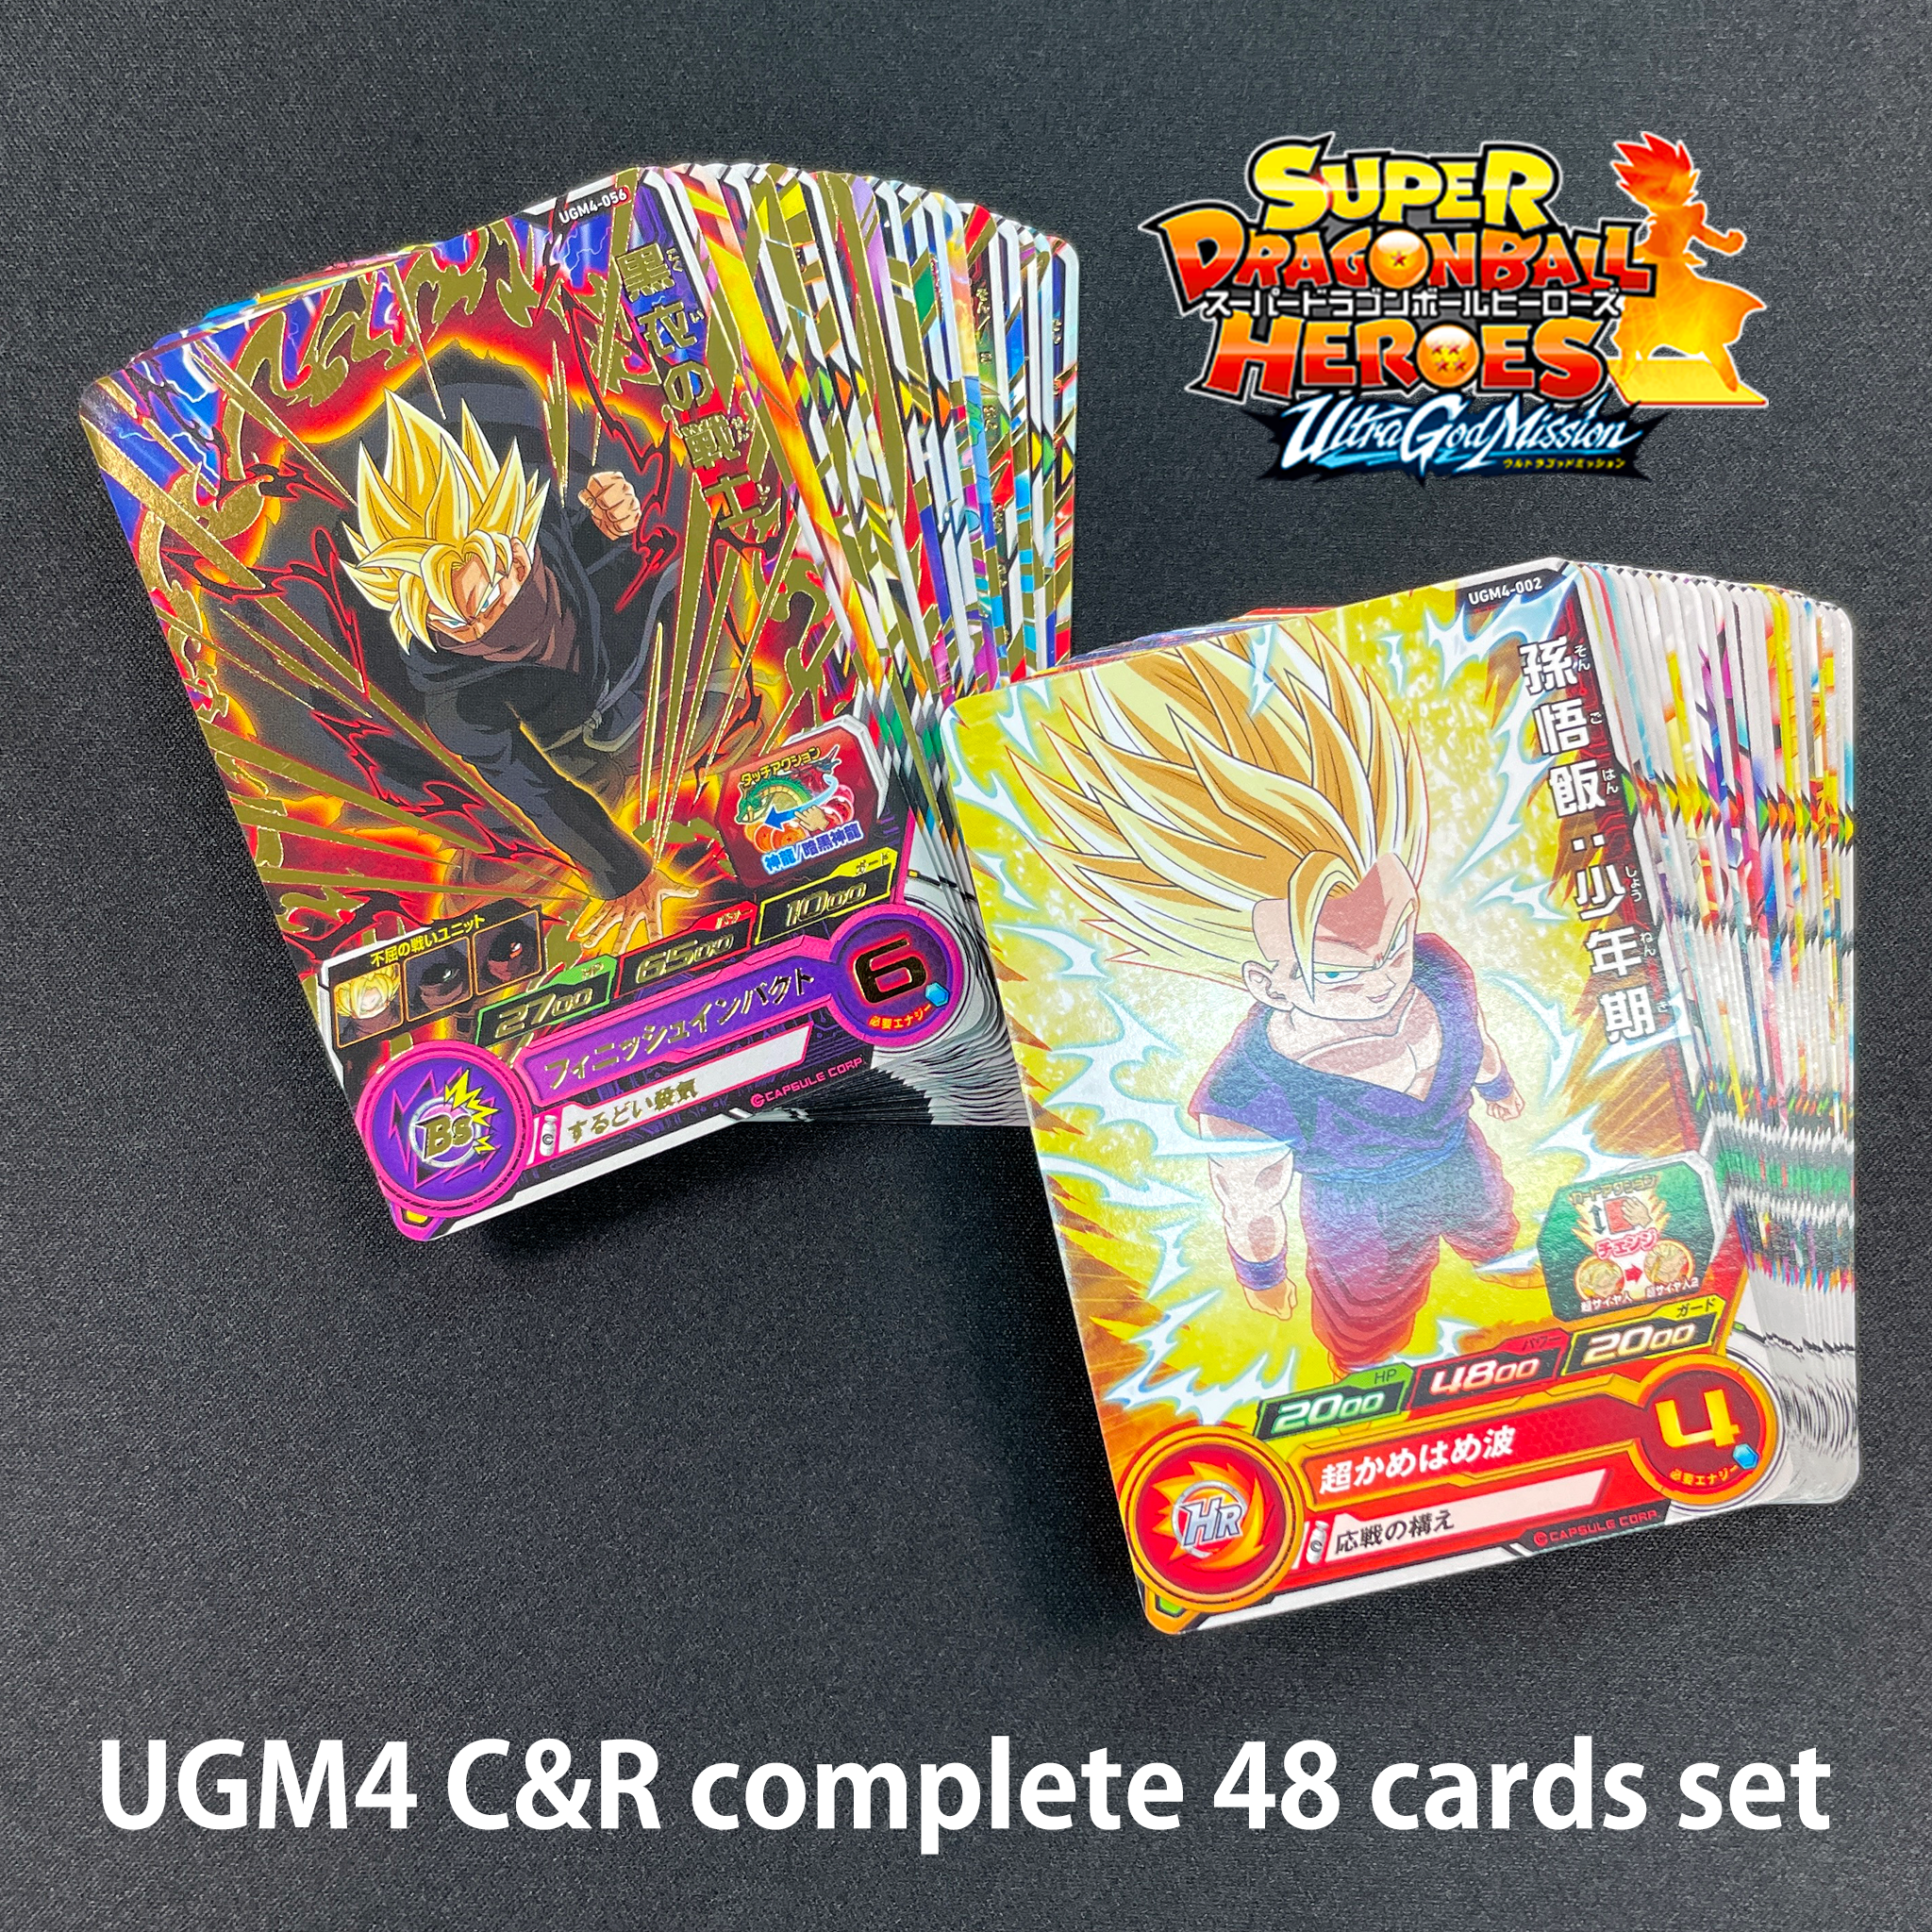 SDBH UGM4 C&R complete 48 cards set